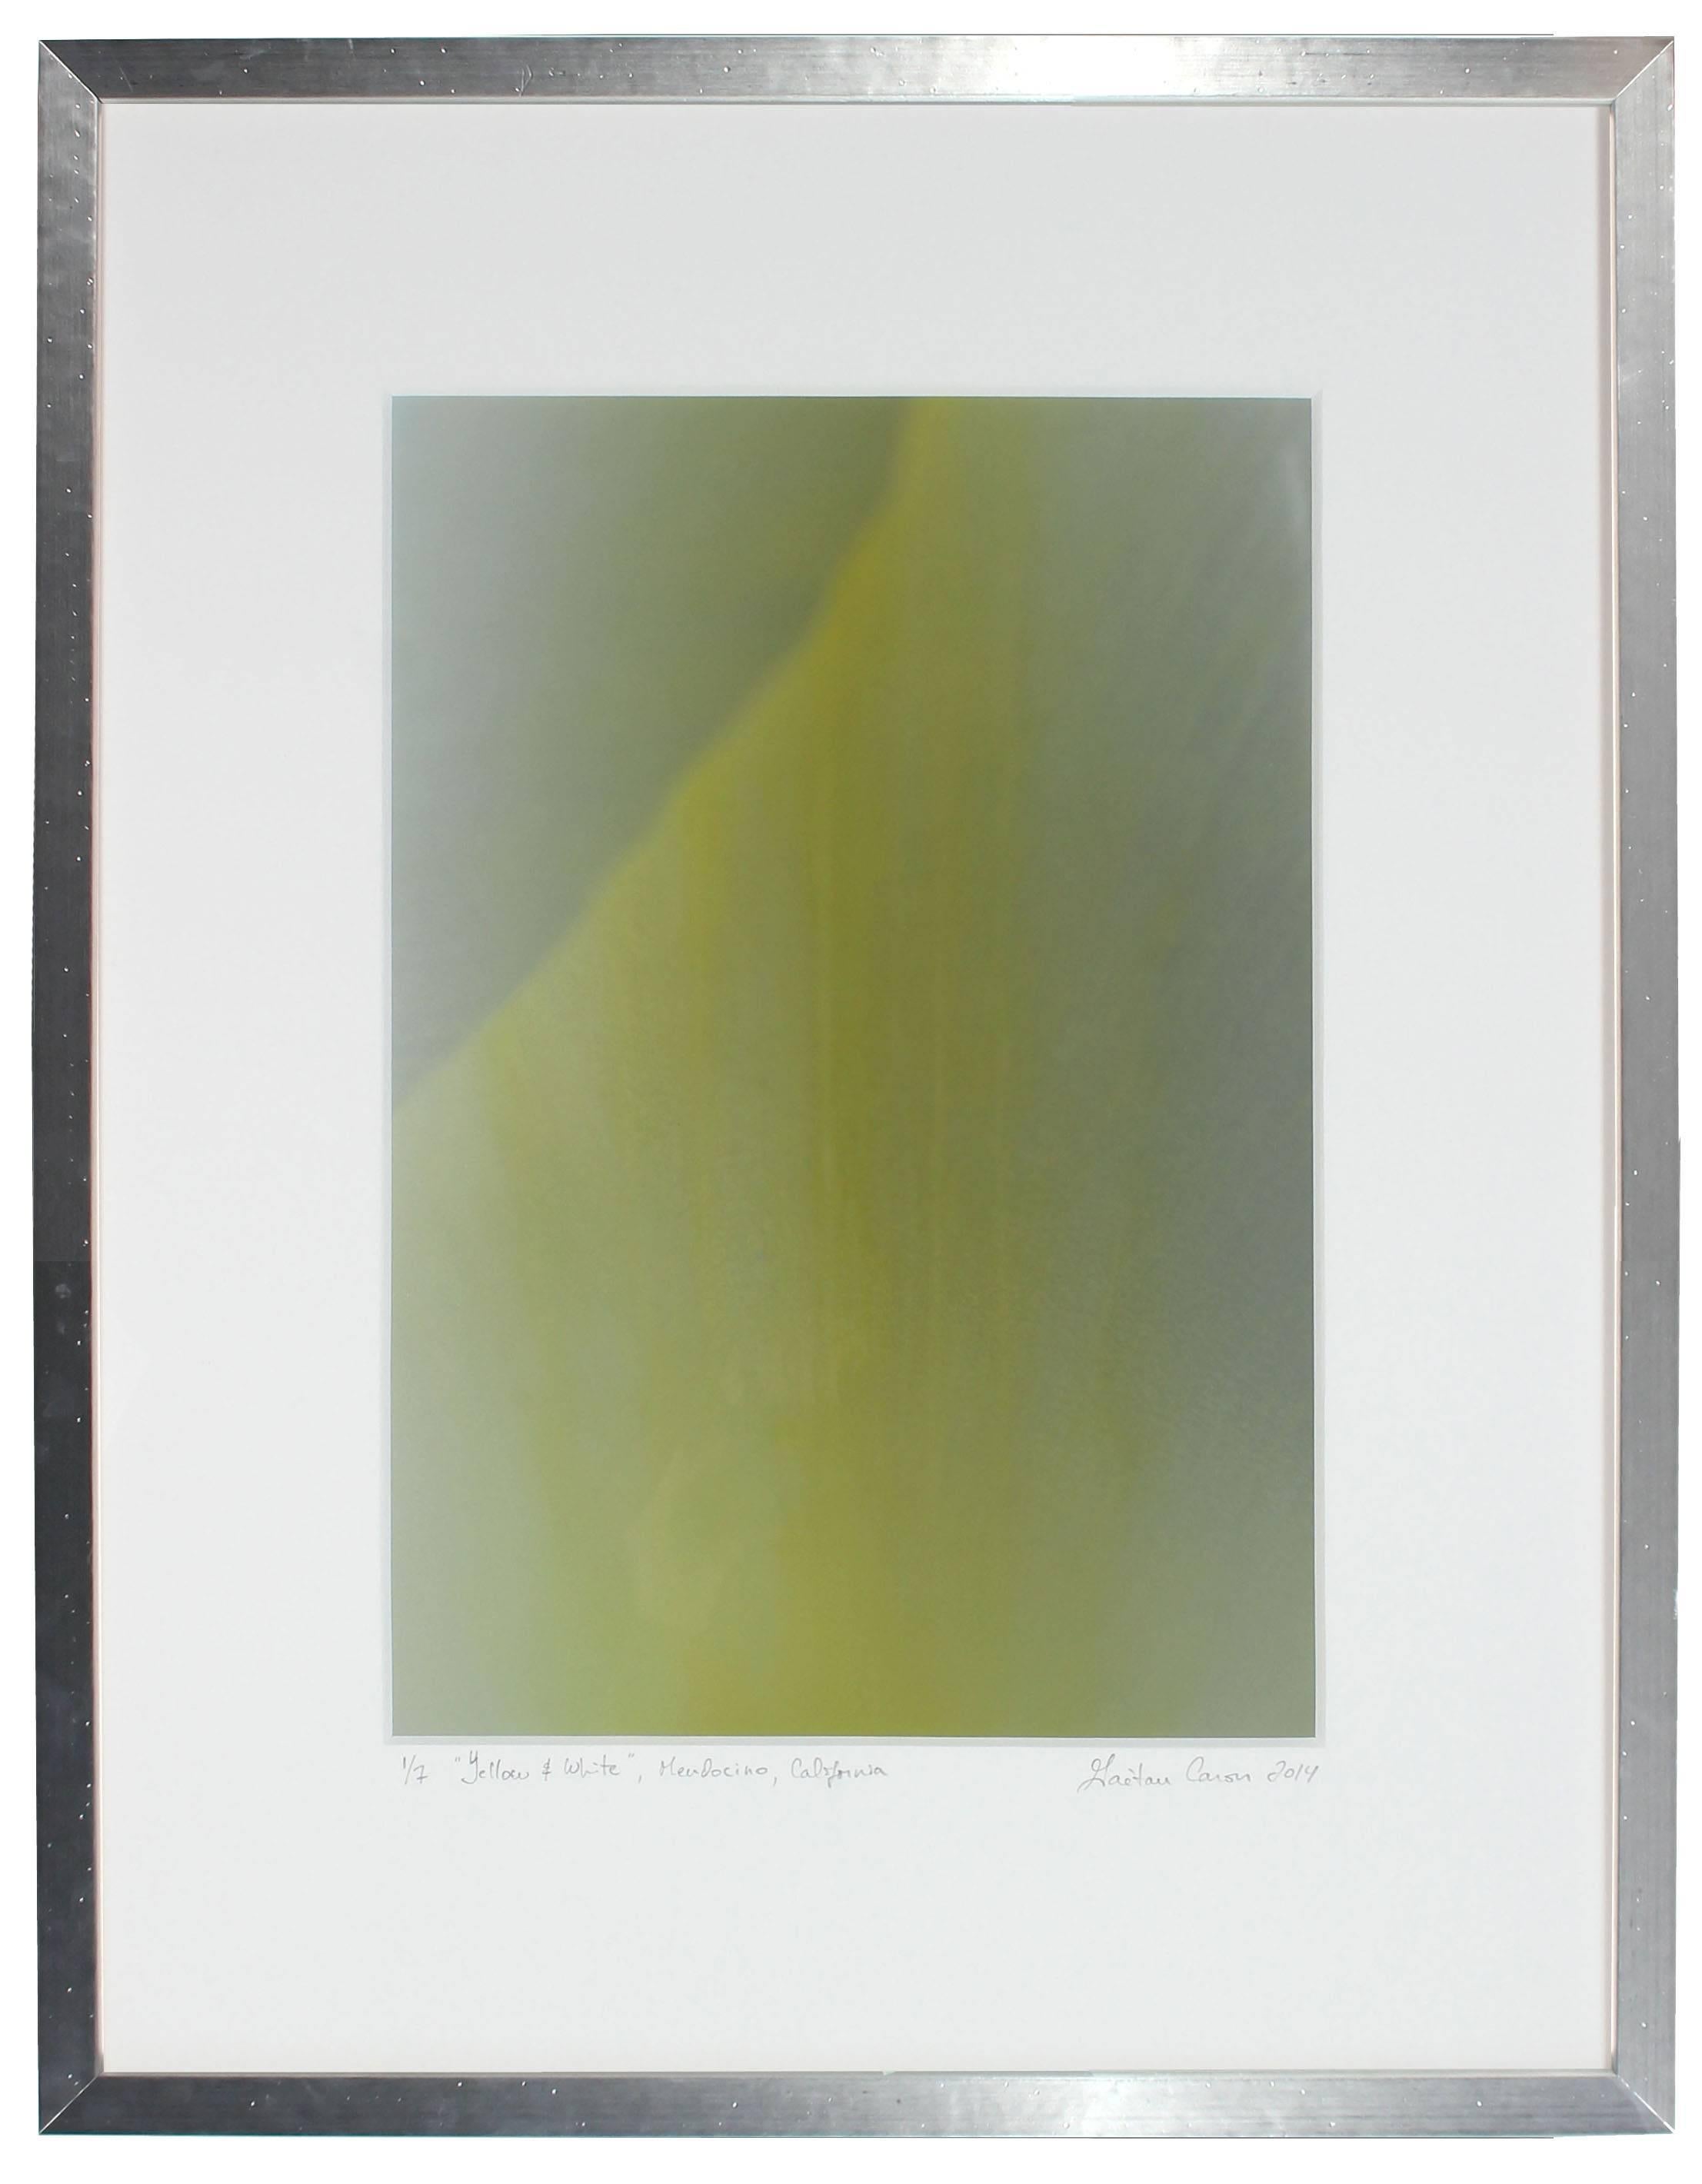 Please allow at least 14 days for printing and framing before a piece is shipped.

Entitled"Yellow & White", this 2014 archival photograph on Hahnemuhle Fine Art Pearl paper is by contemporary Mendocino/Bay Area artist, Gaétan Caron